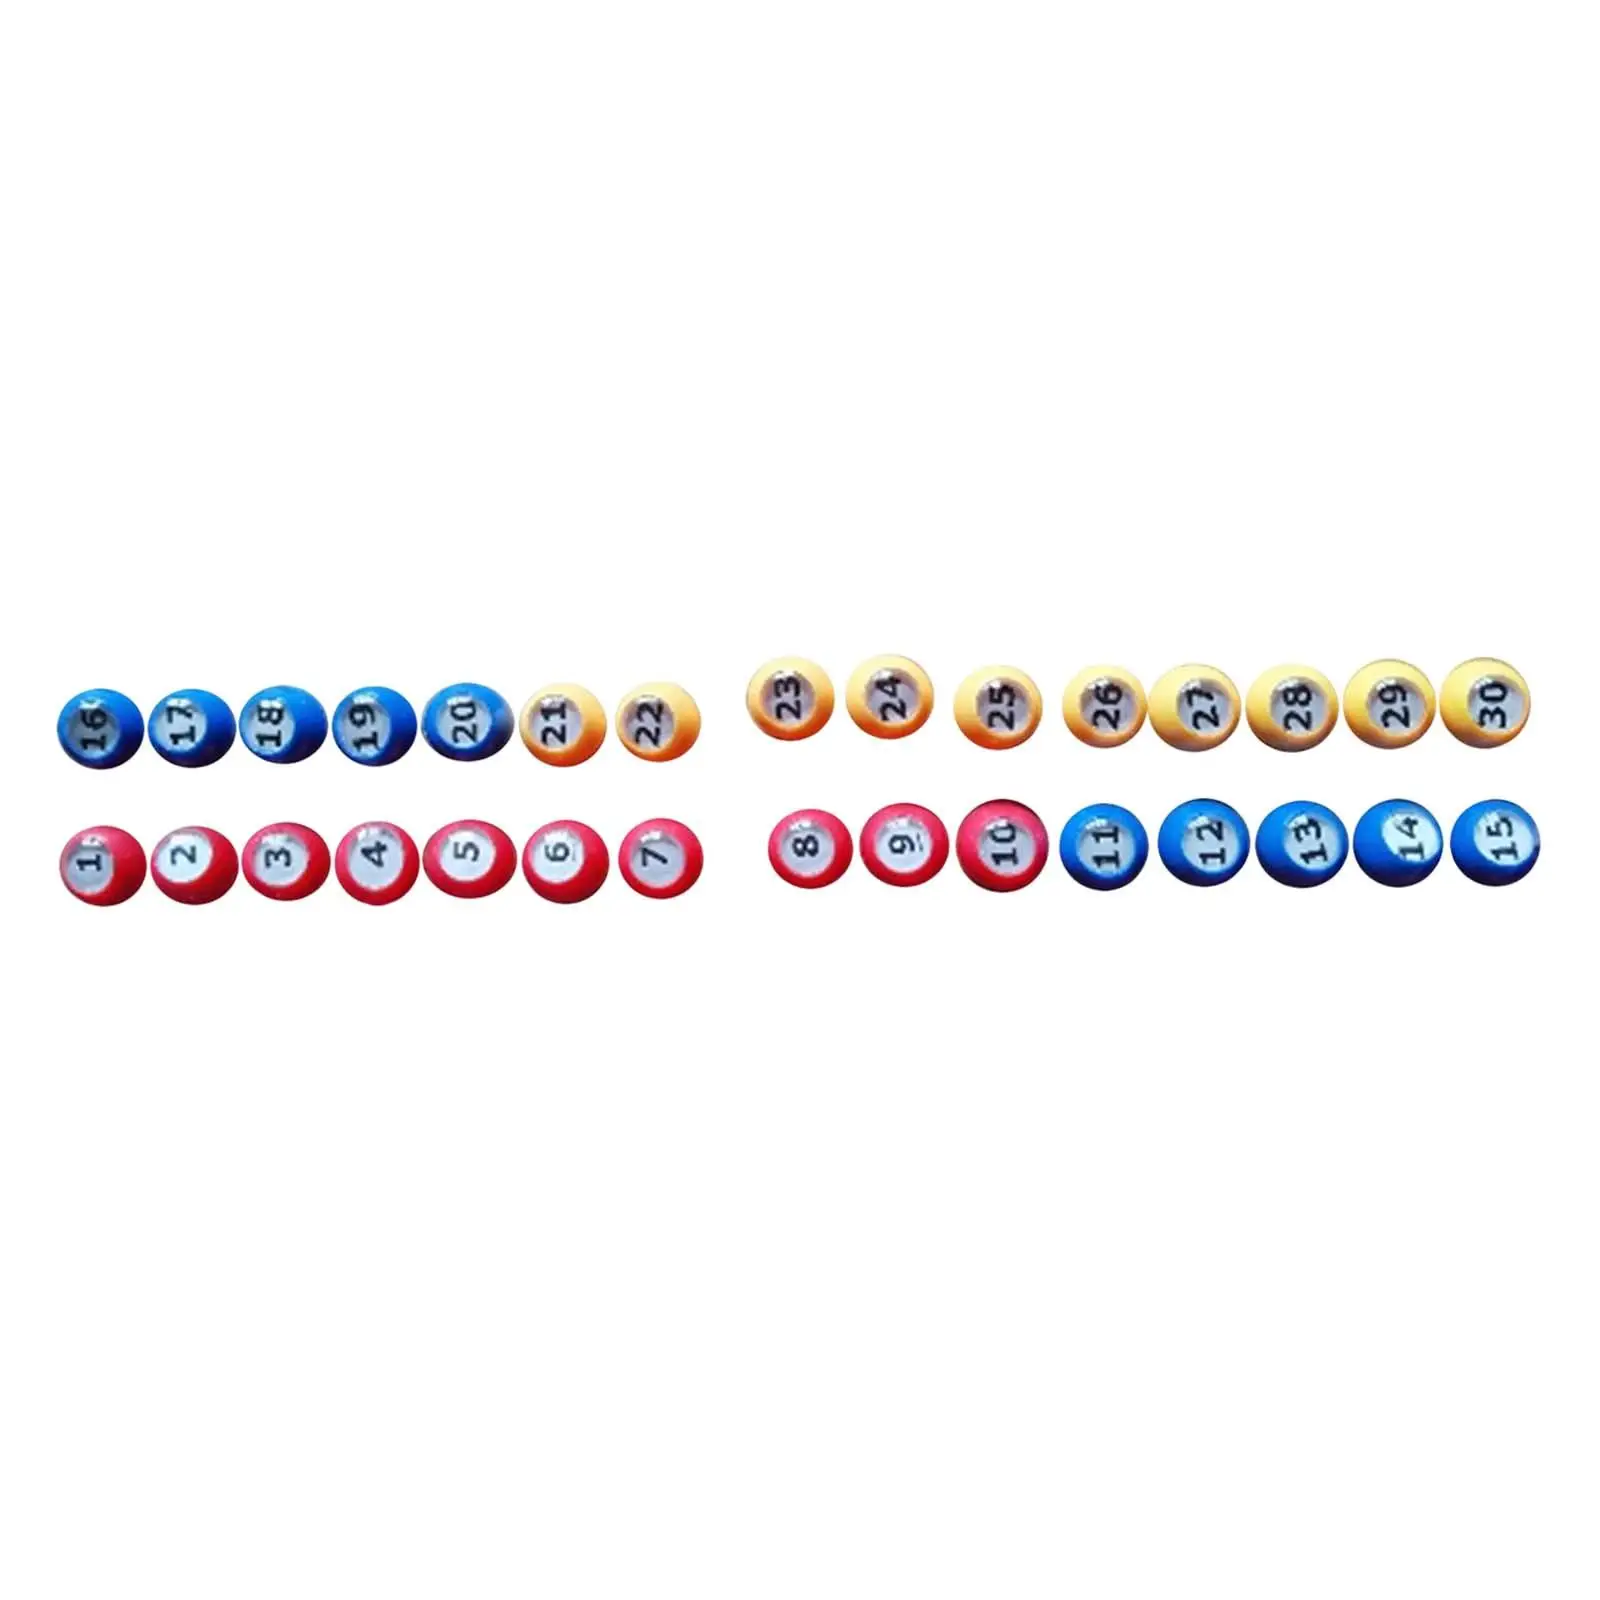 30 Pieces Bingo Ball Fitments Replacement Parts Universal Raffle Balls for